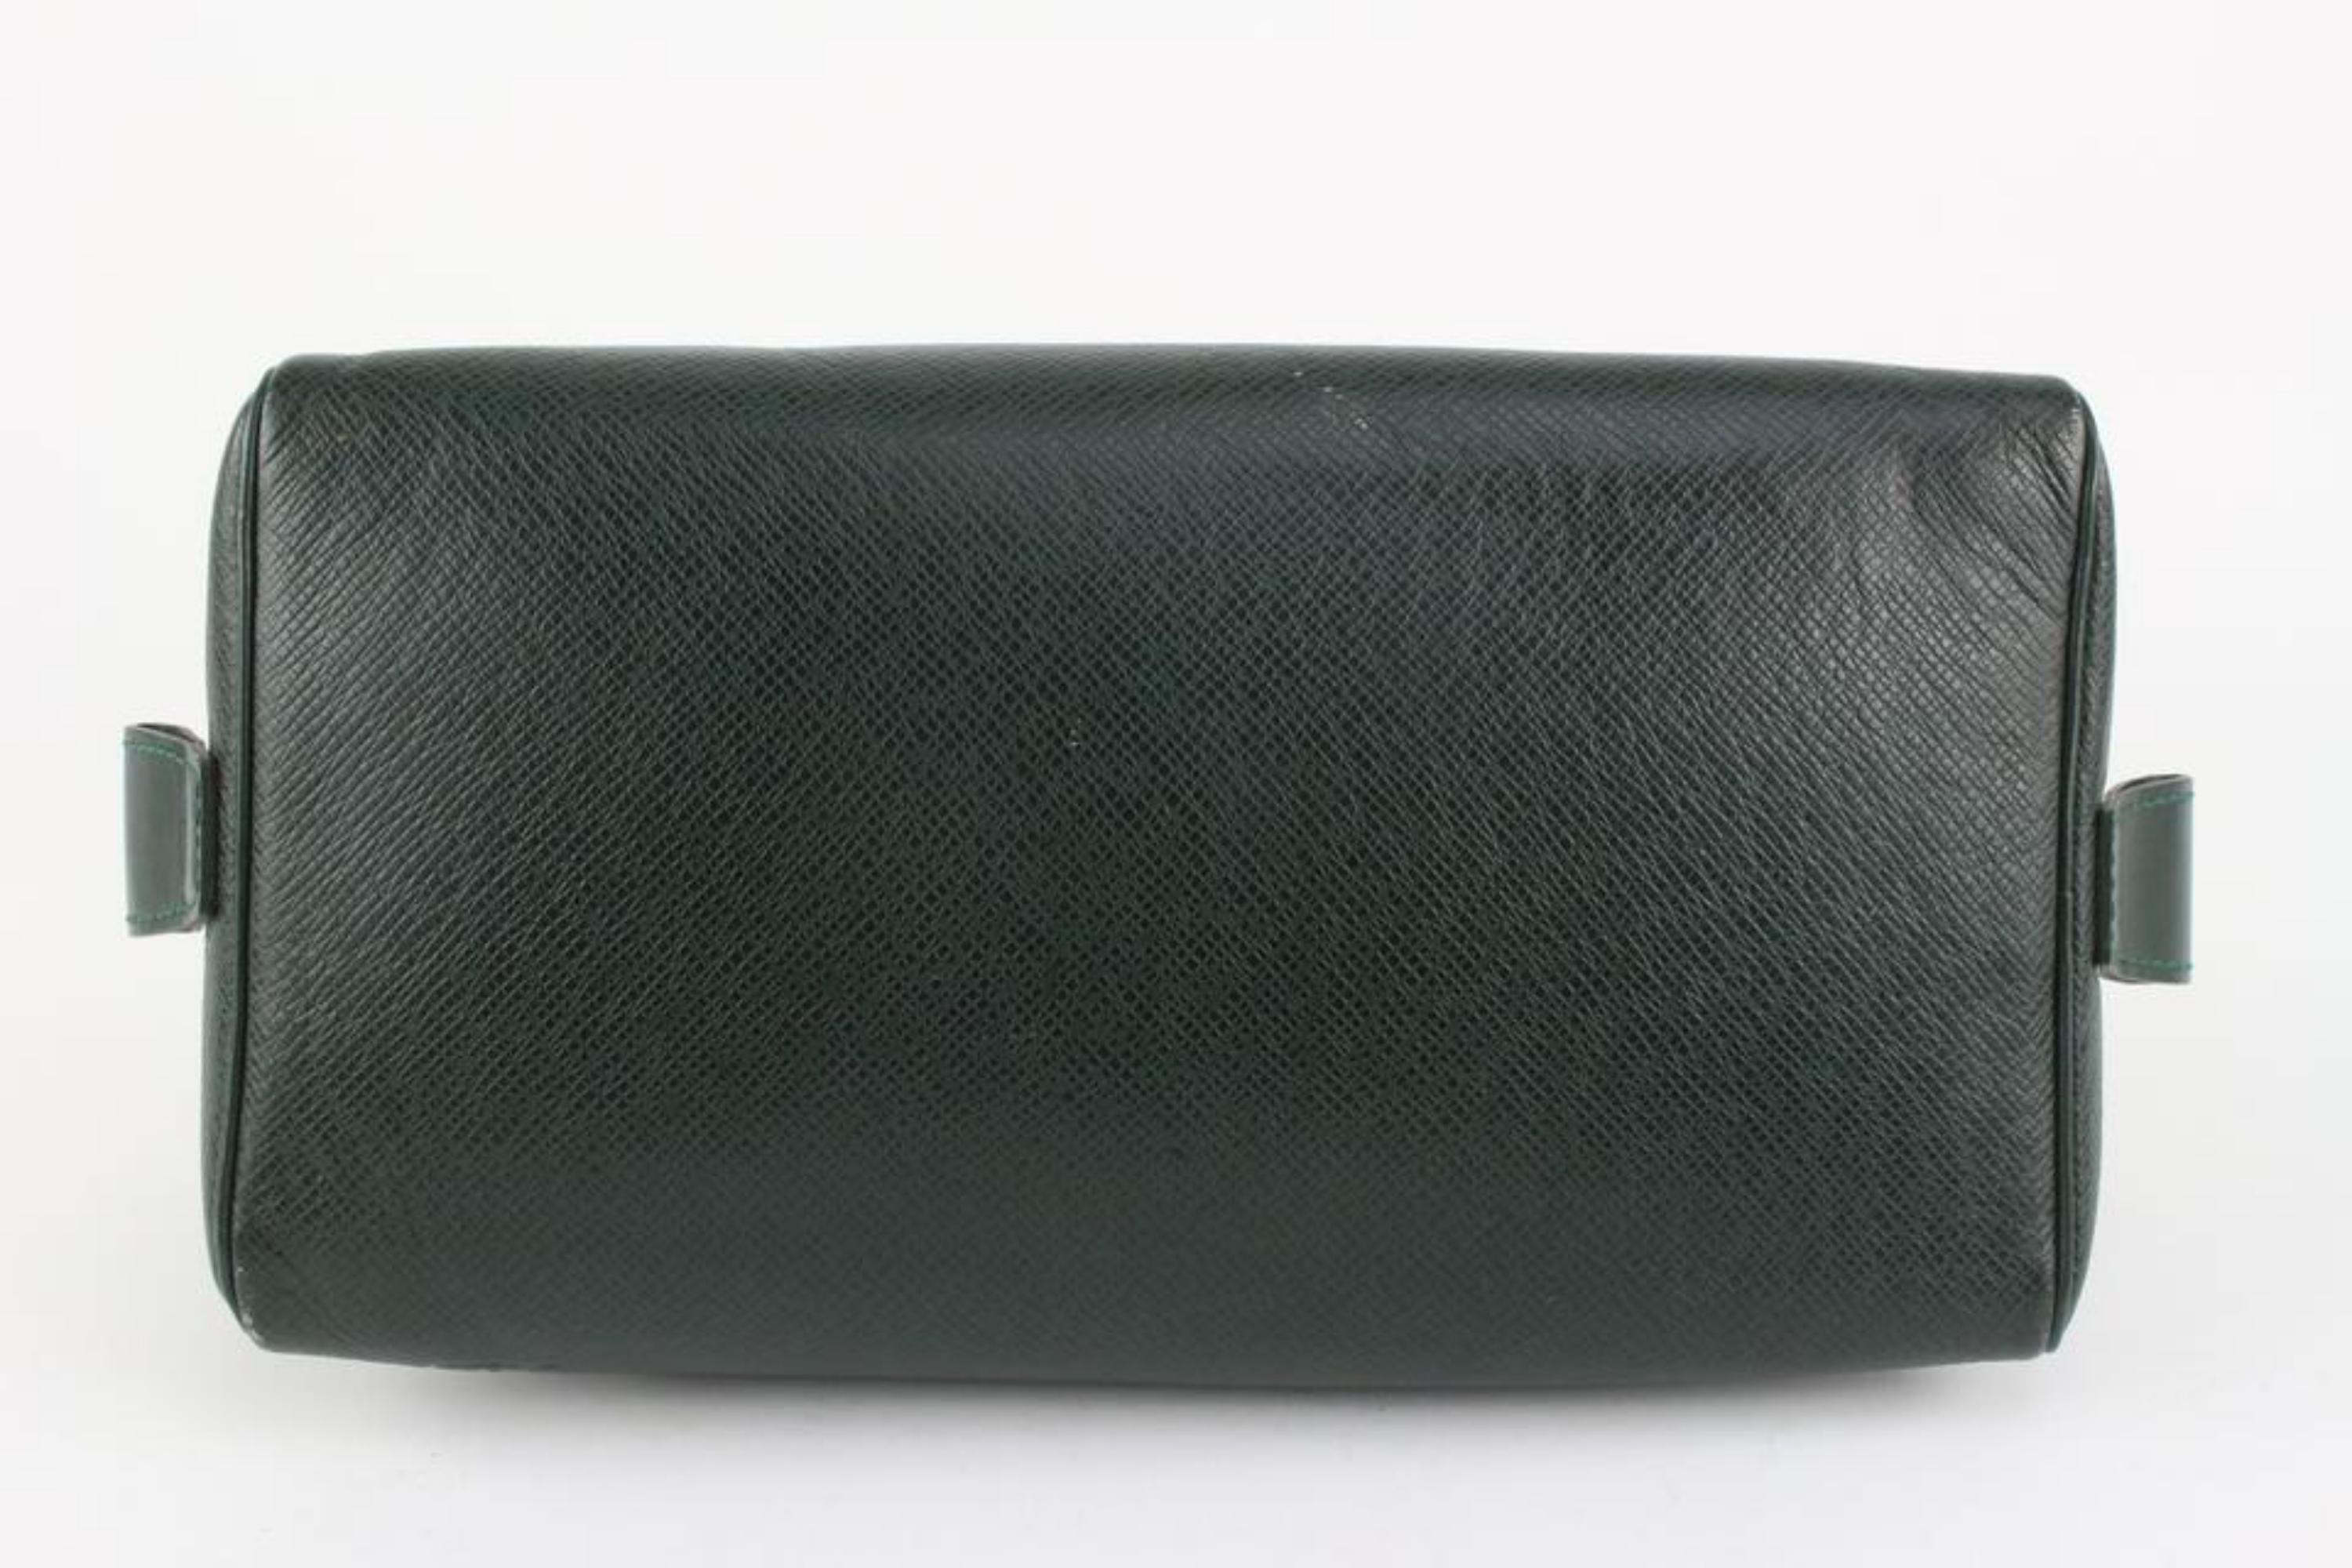 Black Louis Vuitton Green Taiga Leather Trousse Cosmetic Pouch Toiletry Case 1210lv40